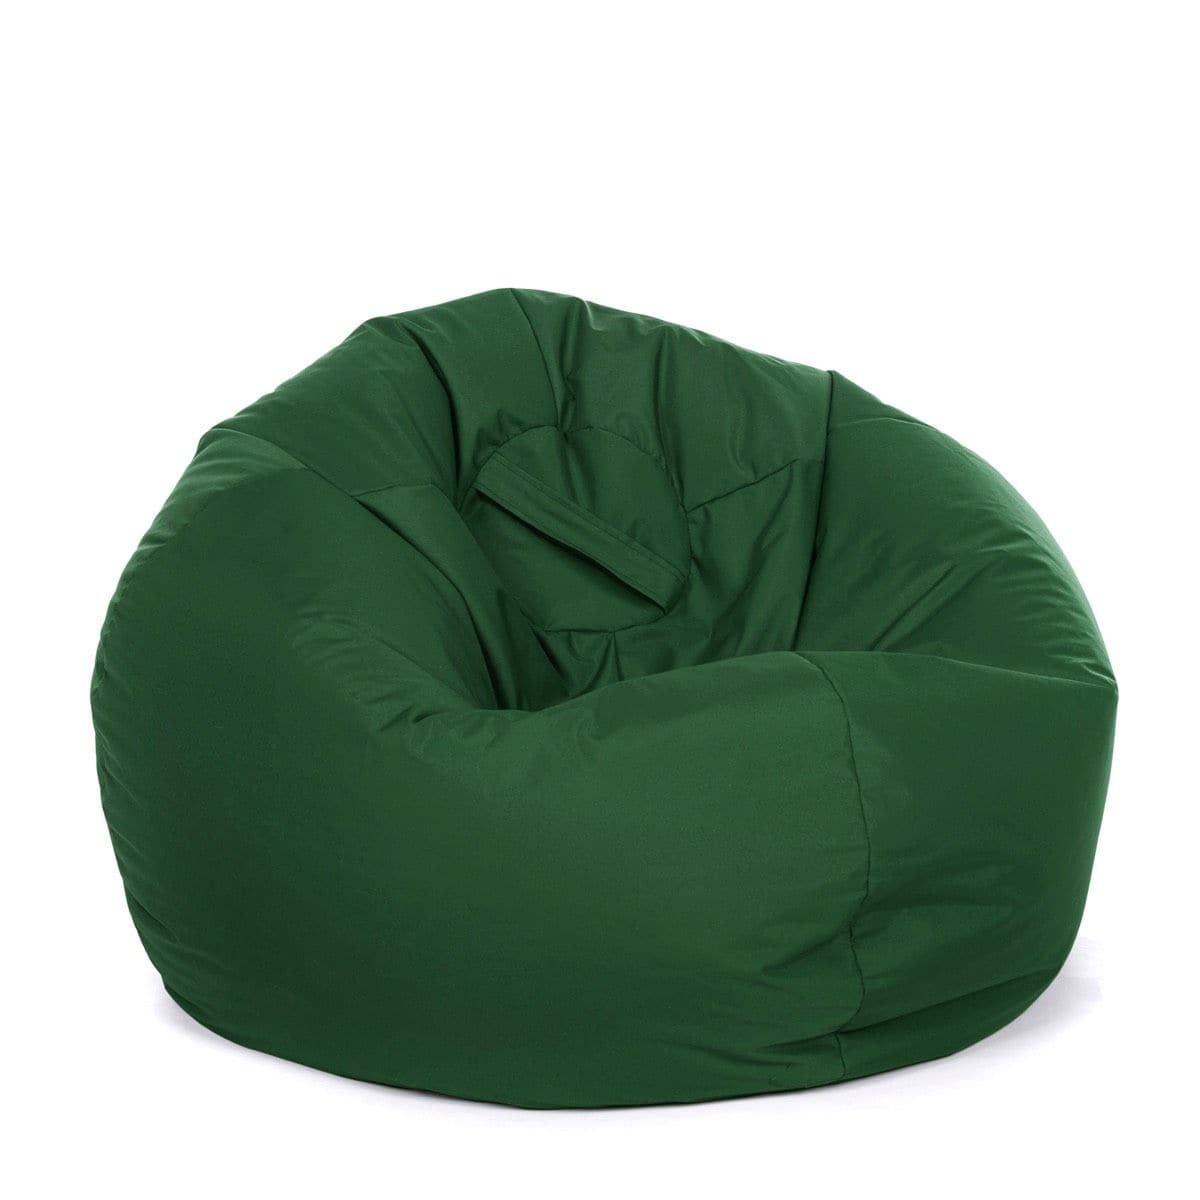 Primary Bean Bag Classic, The Primary Bean Bag Classic brings a bit of retro style to the classroom or home with this primary classic bean bag. The Primary Bean Bag Classic is perfect for sitting together in groups, this bean bag is an all time favourite. Soft, shower-proof and UV Resistant material Our Indoor/Outdoor bean bags are made from a soft, shower-proof and UV Resistant material - meaning the sun and rain won't damage them! Although perfectly suited for use outside, the Indoor/Outdoor bean bags are